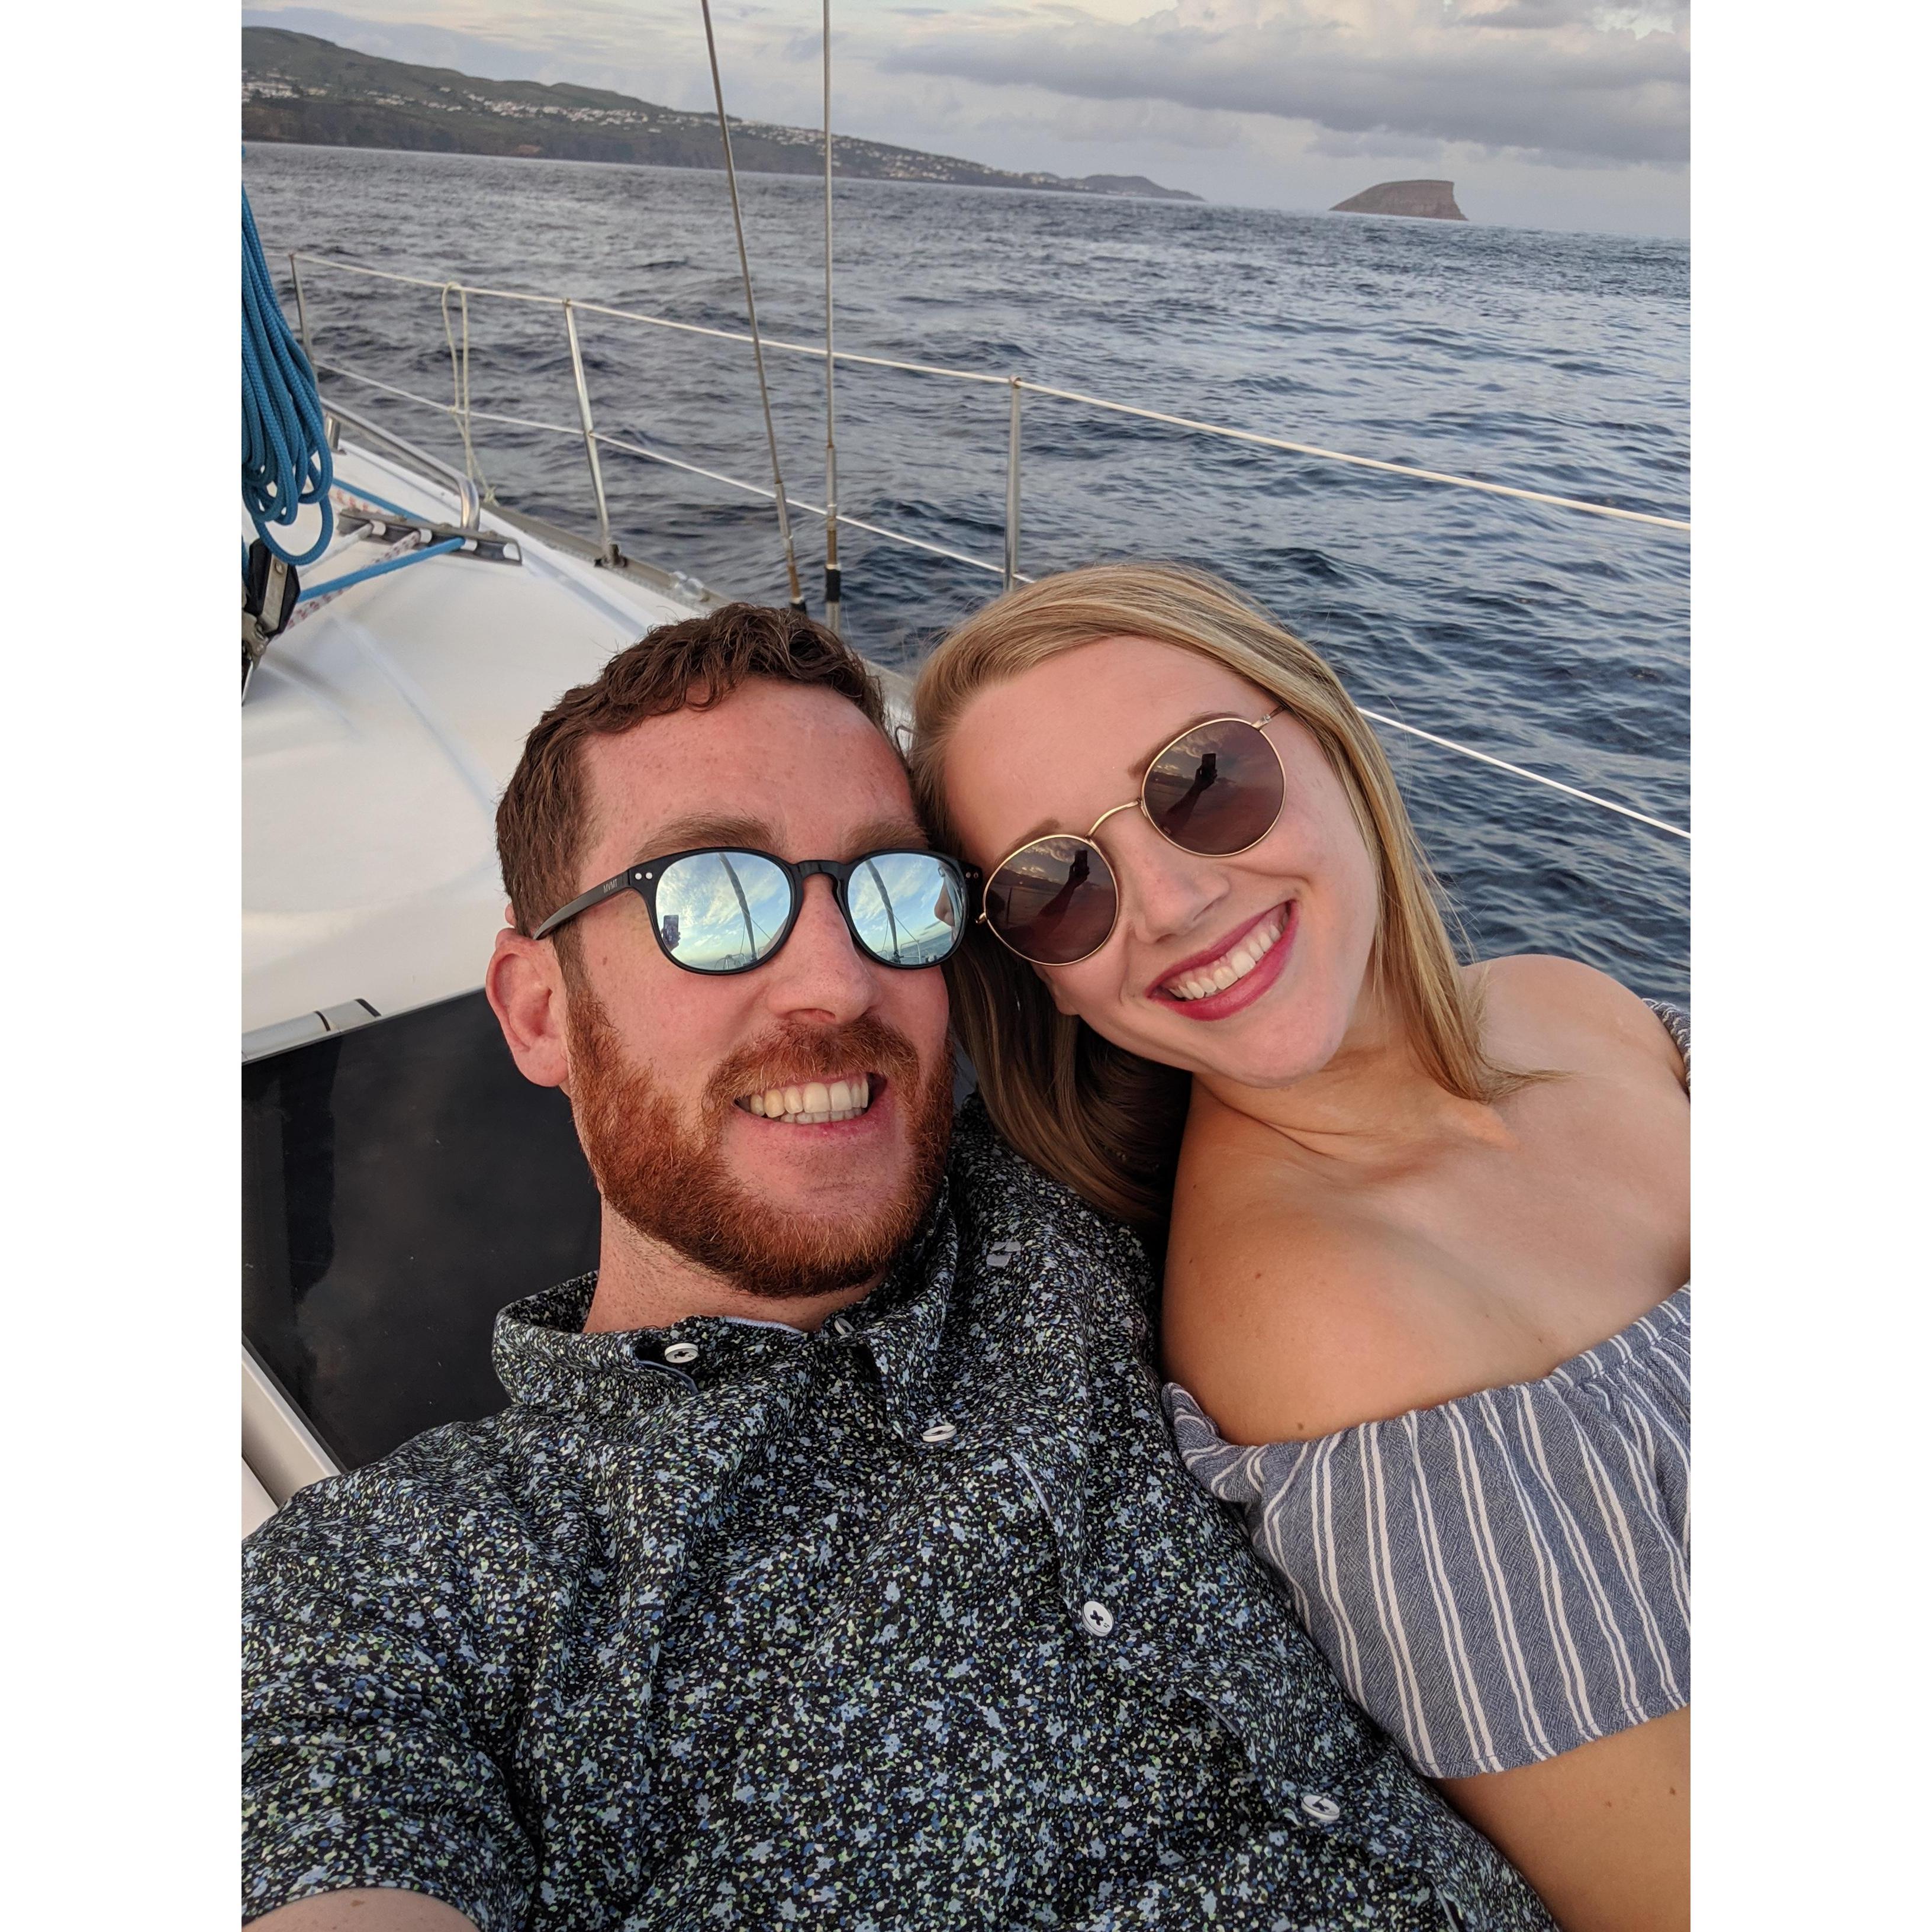 A surprise sailboat ride to celebrate Matt's 30th while we were in the Azores.